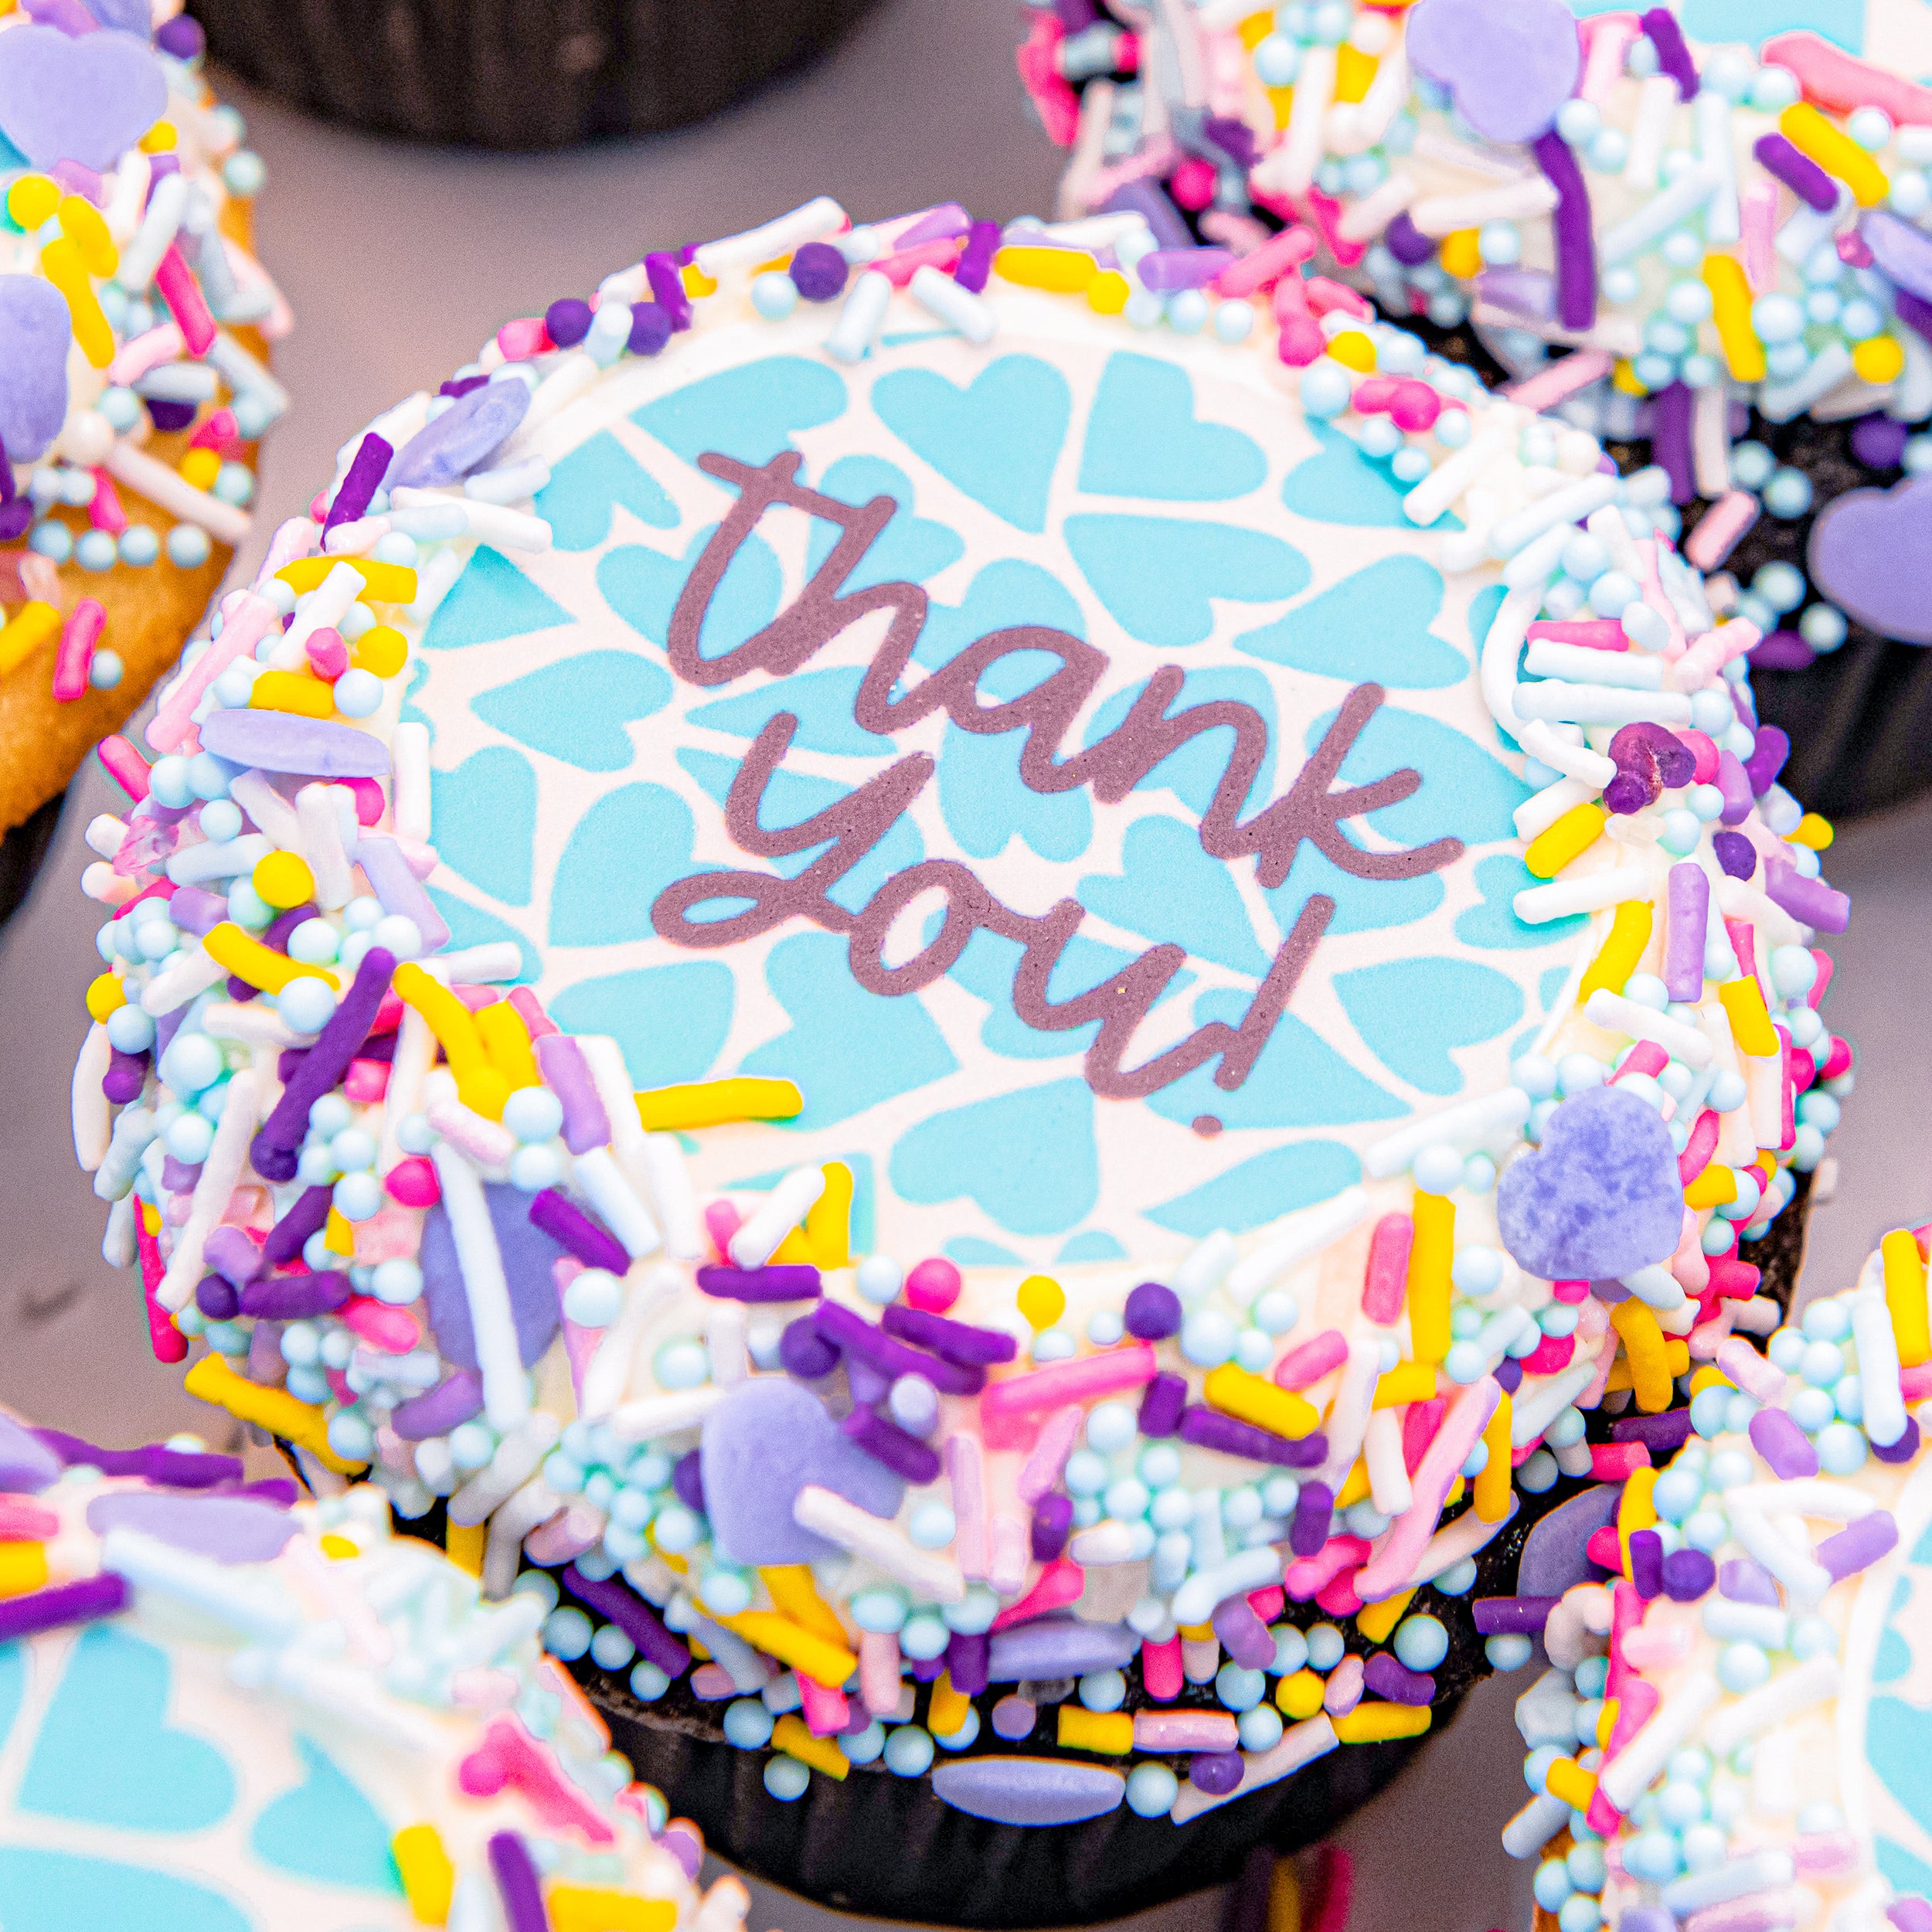 Amazon.com: Thank You Cake Topper Thanks Cake Topper Cake Decoration Black  Acrylic Cake Topper Cake Decoration : Grocery & Gourmet Food